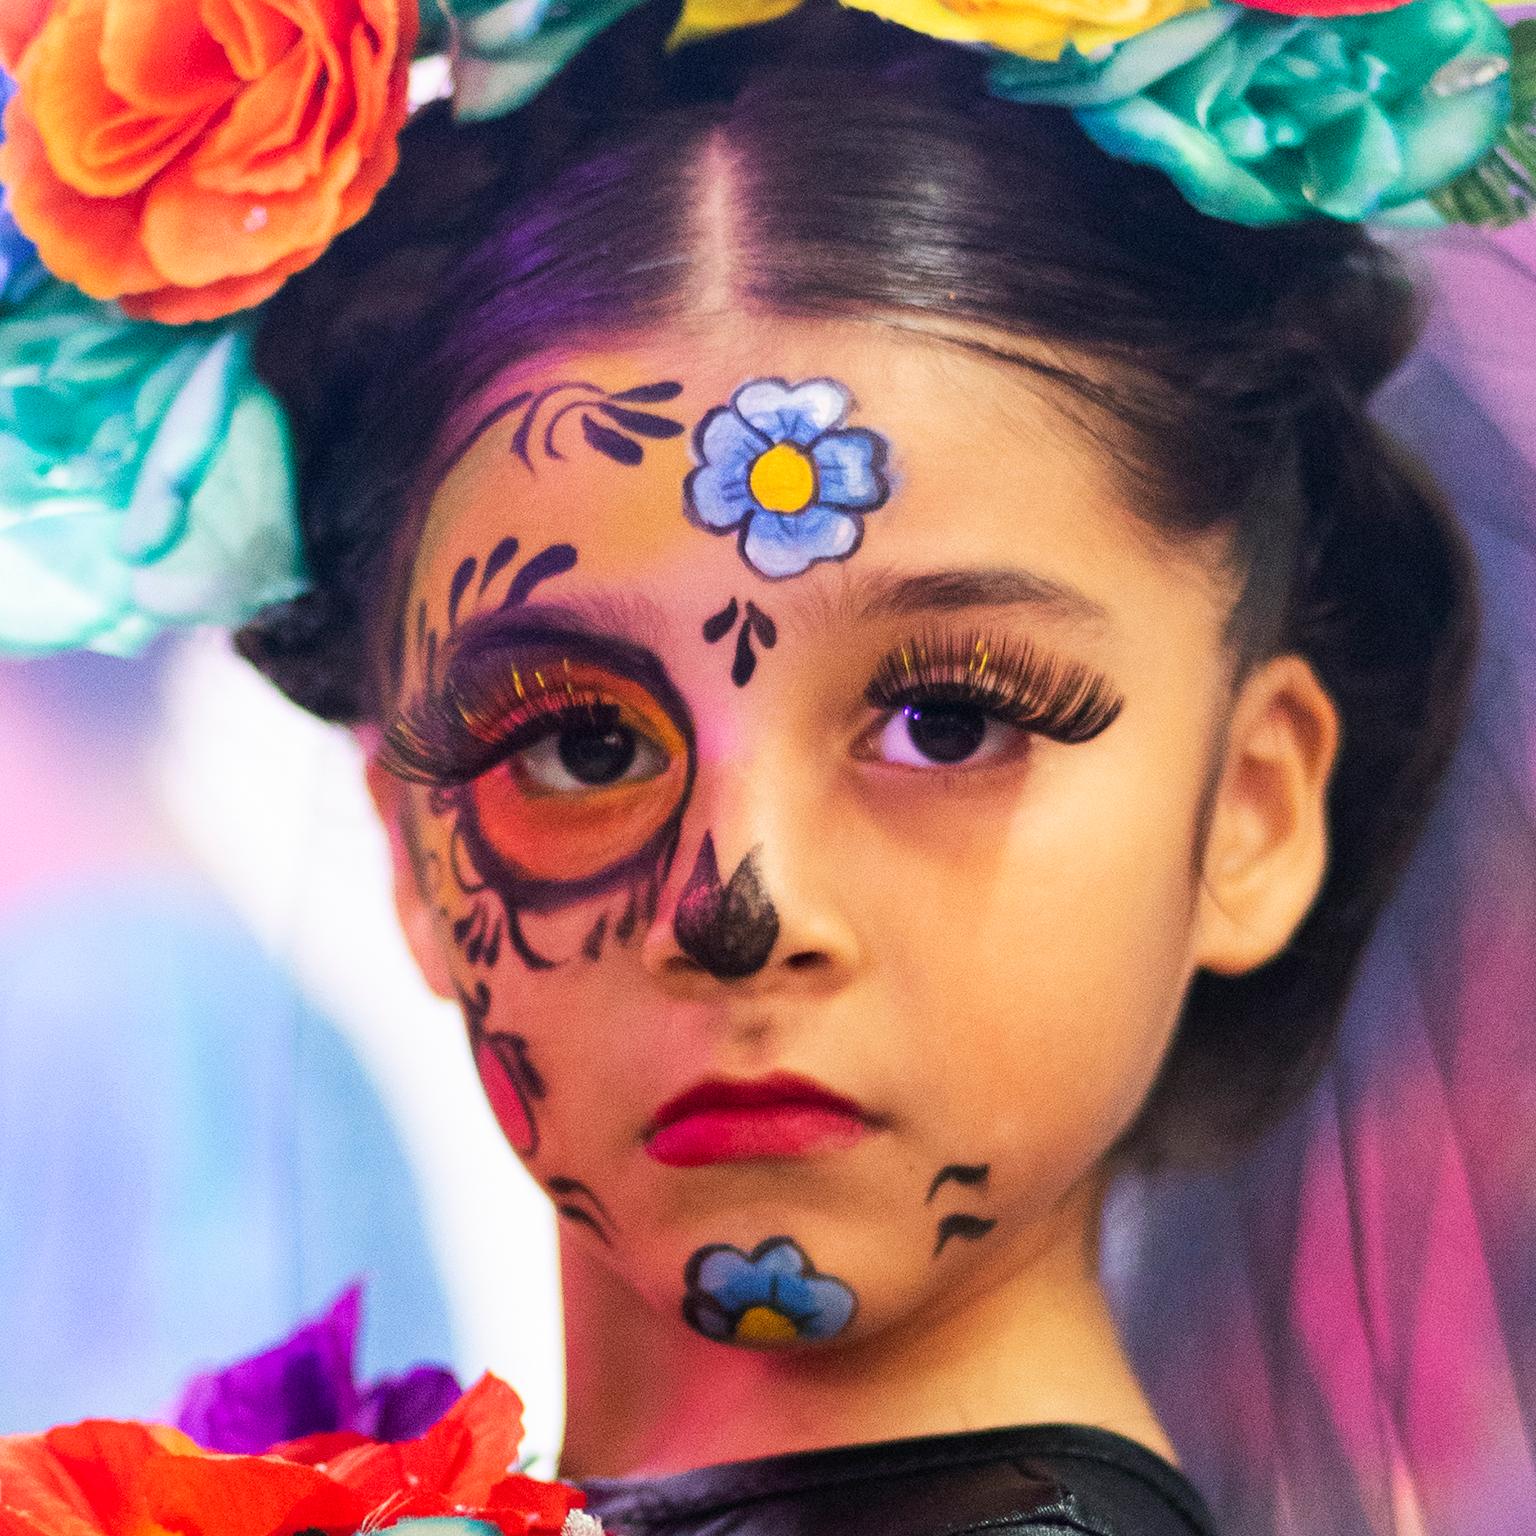 She has attitude! Young girl dressed for Day of the Dead, Dia de los Muertos, Isla Mujeres, Mexico, 2023

Photograph by Cosmo Condina in colour of a young girl dressed for the celebration of the Day of the Dead. Isla Mujeres, Mexico, 2023 

Archival